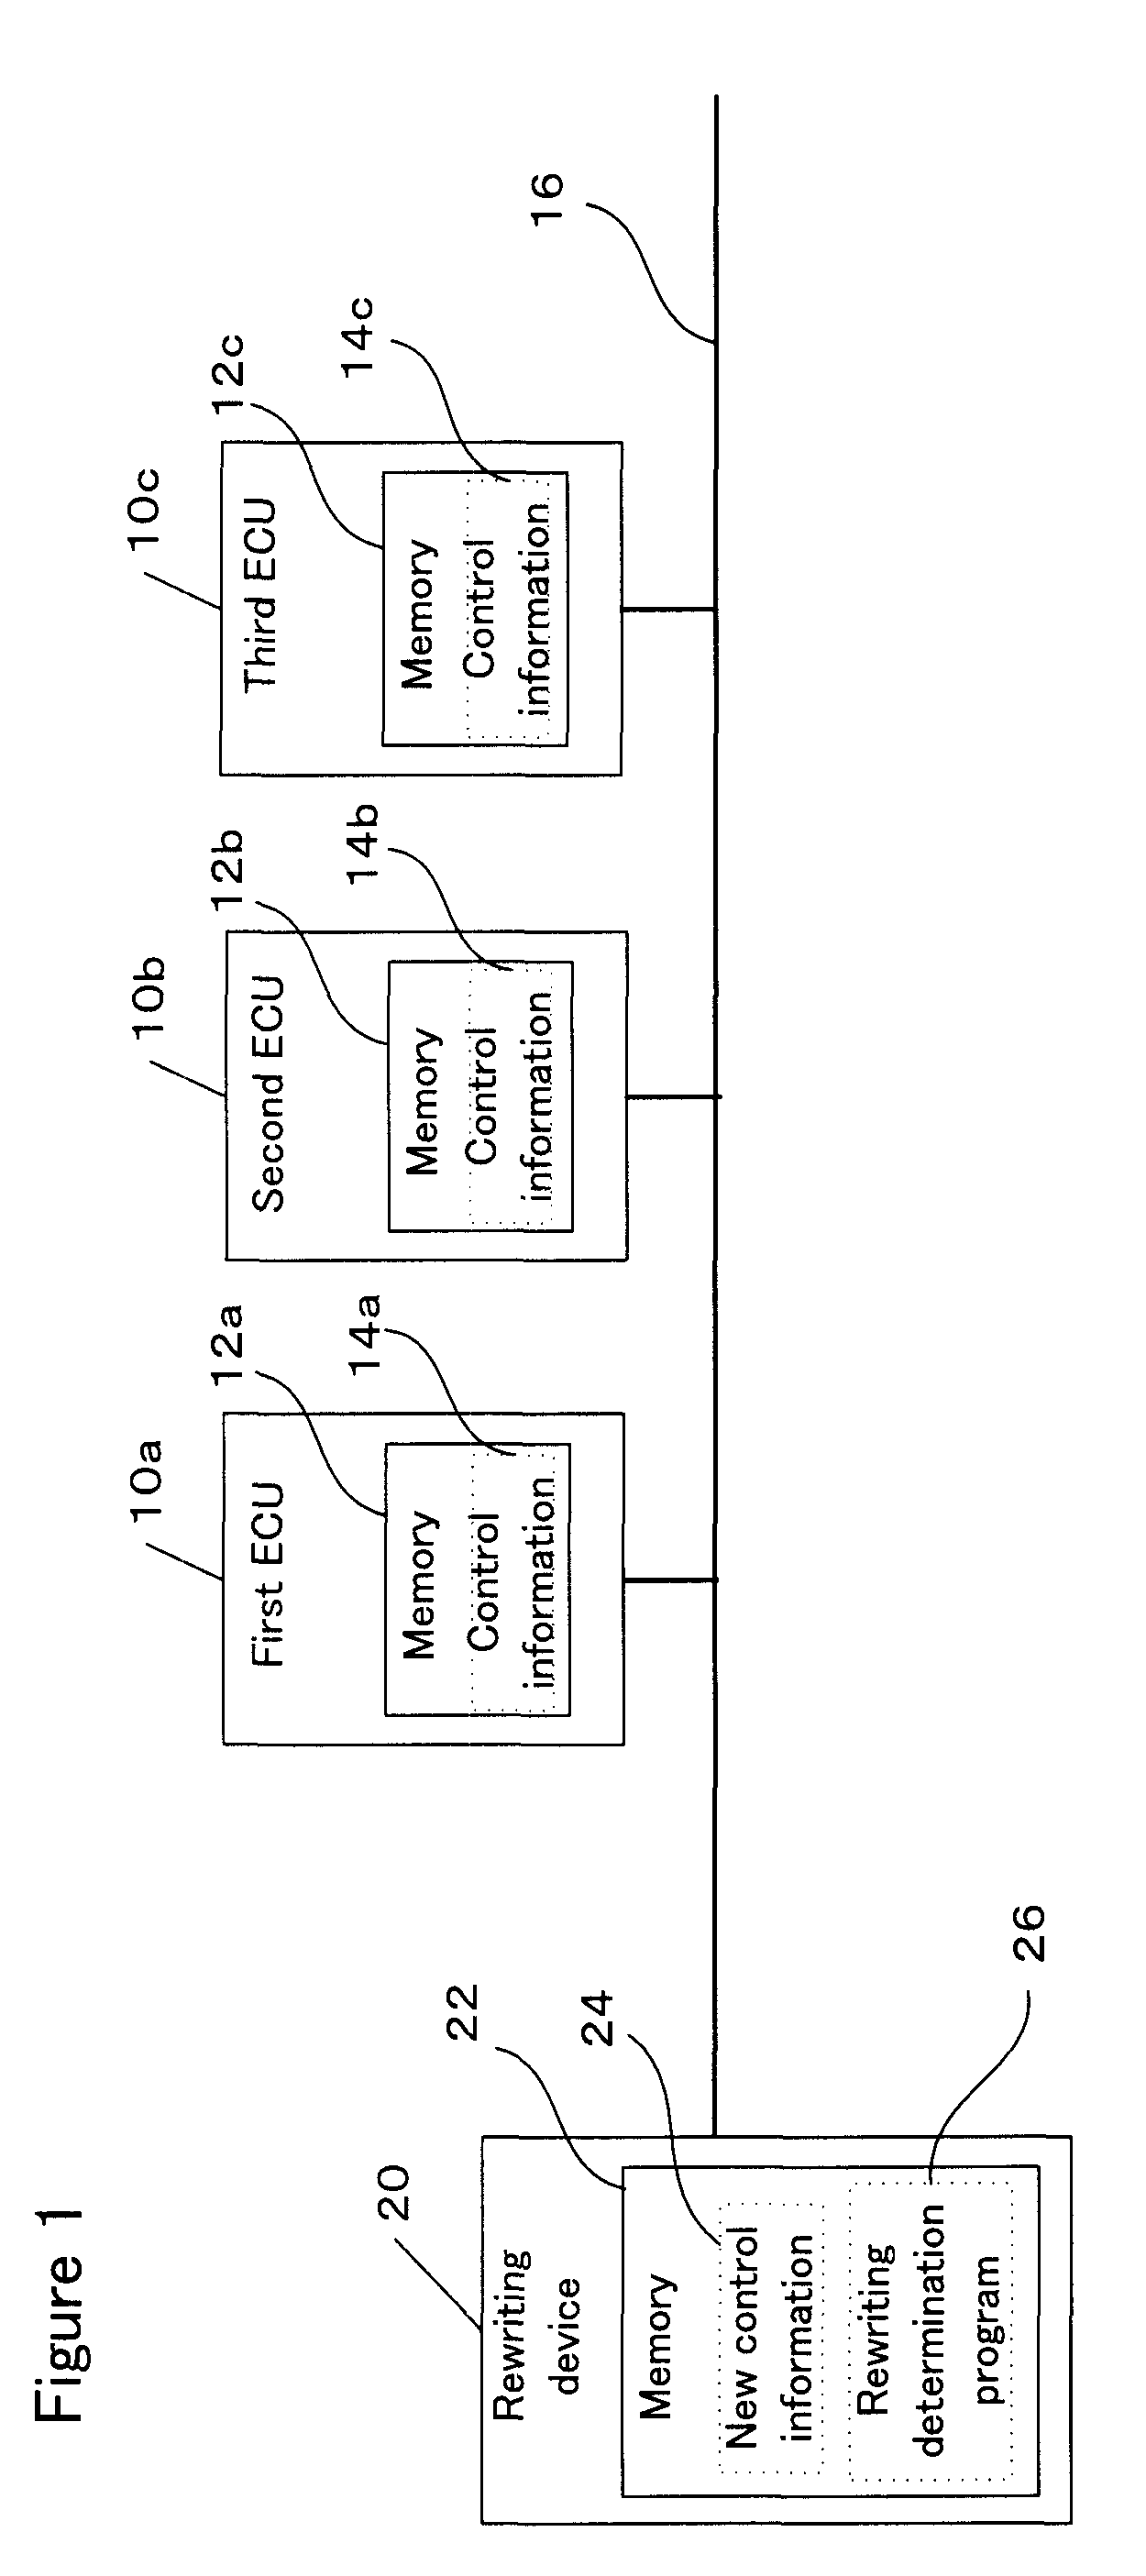 Rewriting system for a vehicle